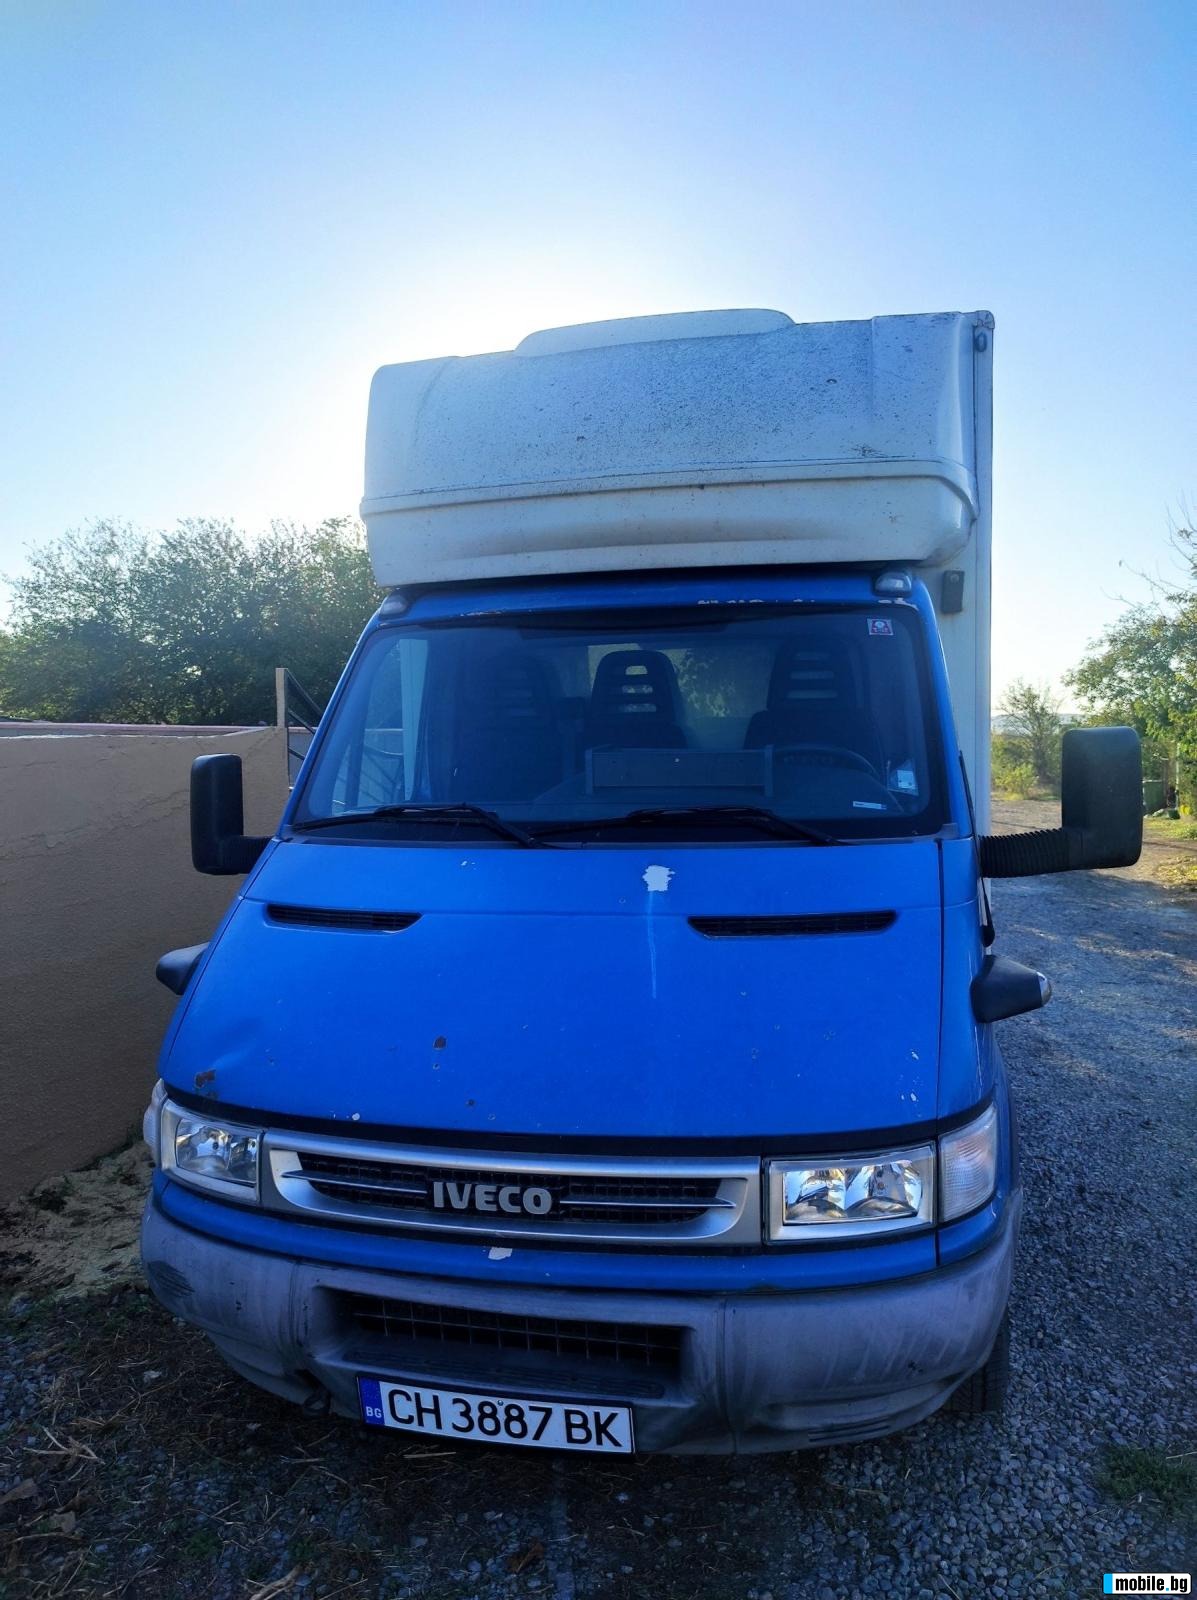 Iveco Daily 35S17 | Mobile.bg   2